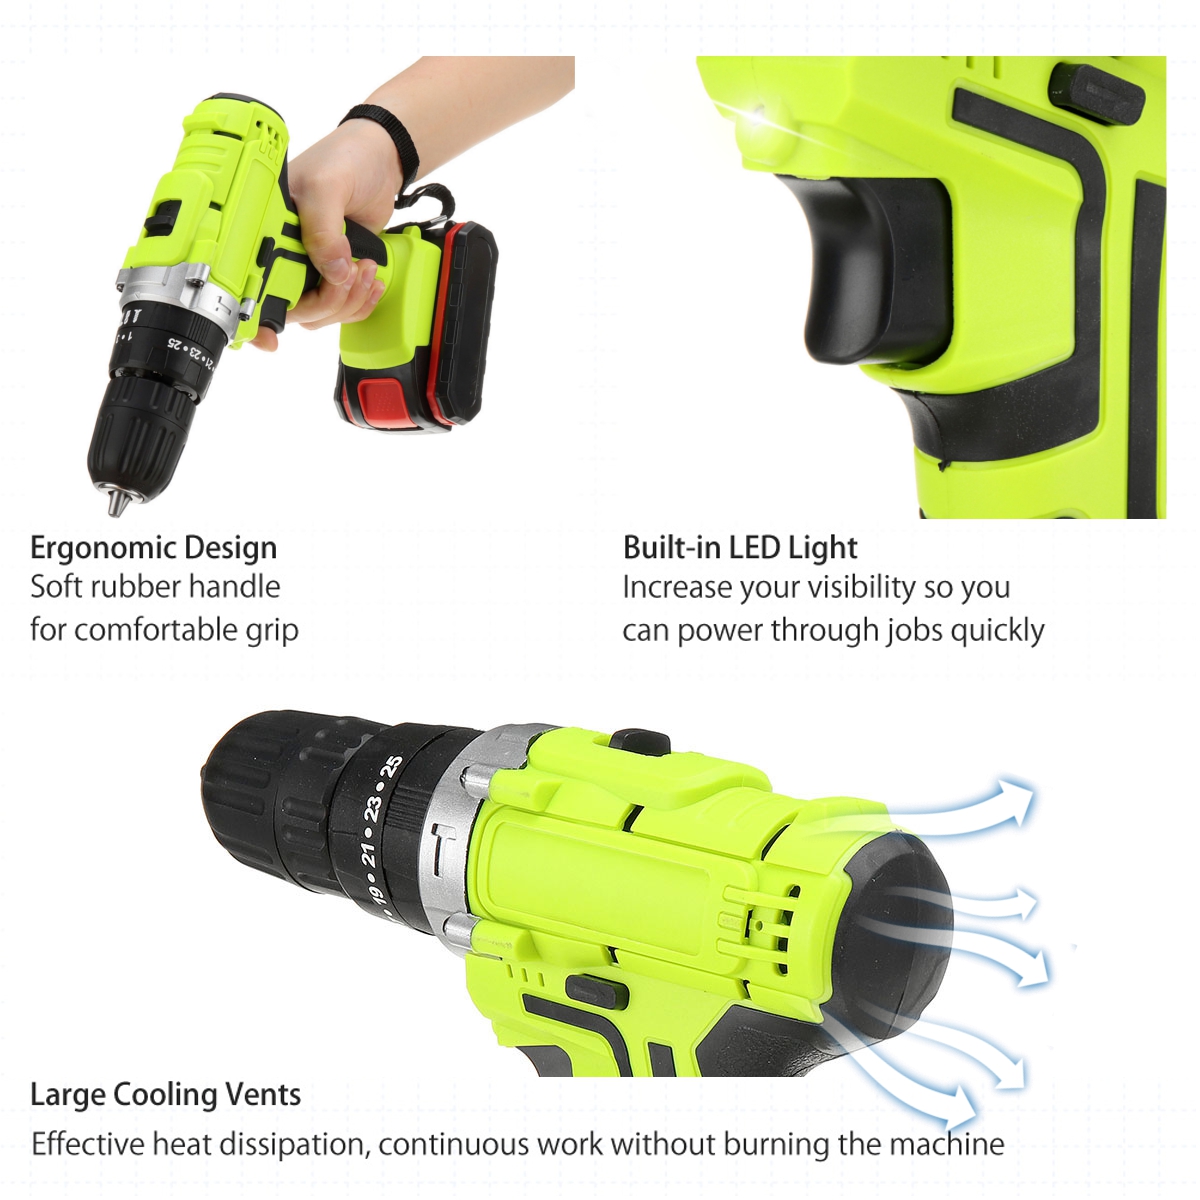 48VF-22800mAh-Cordless-Rechargable-3-In-1-Power-Drills-Impact-Electric-Drill-Driver-With-2Pcs-Batter-1877445-7